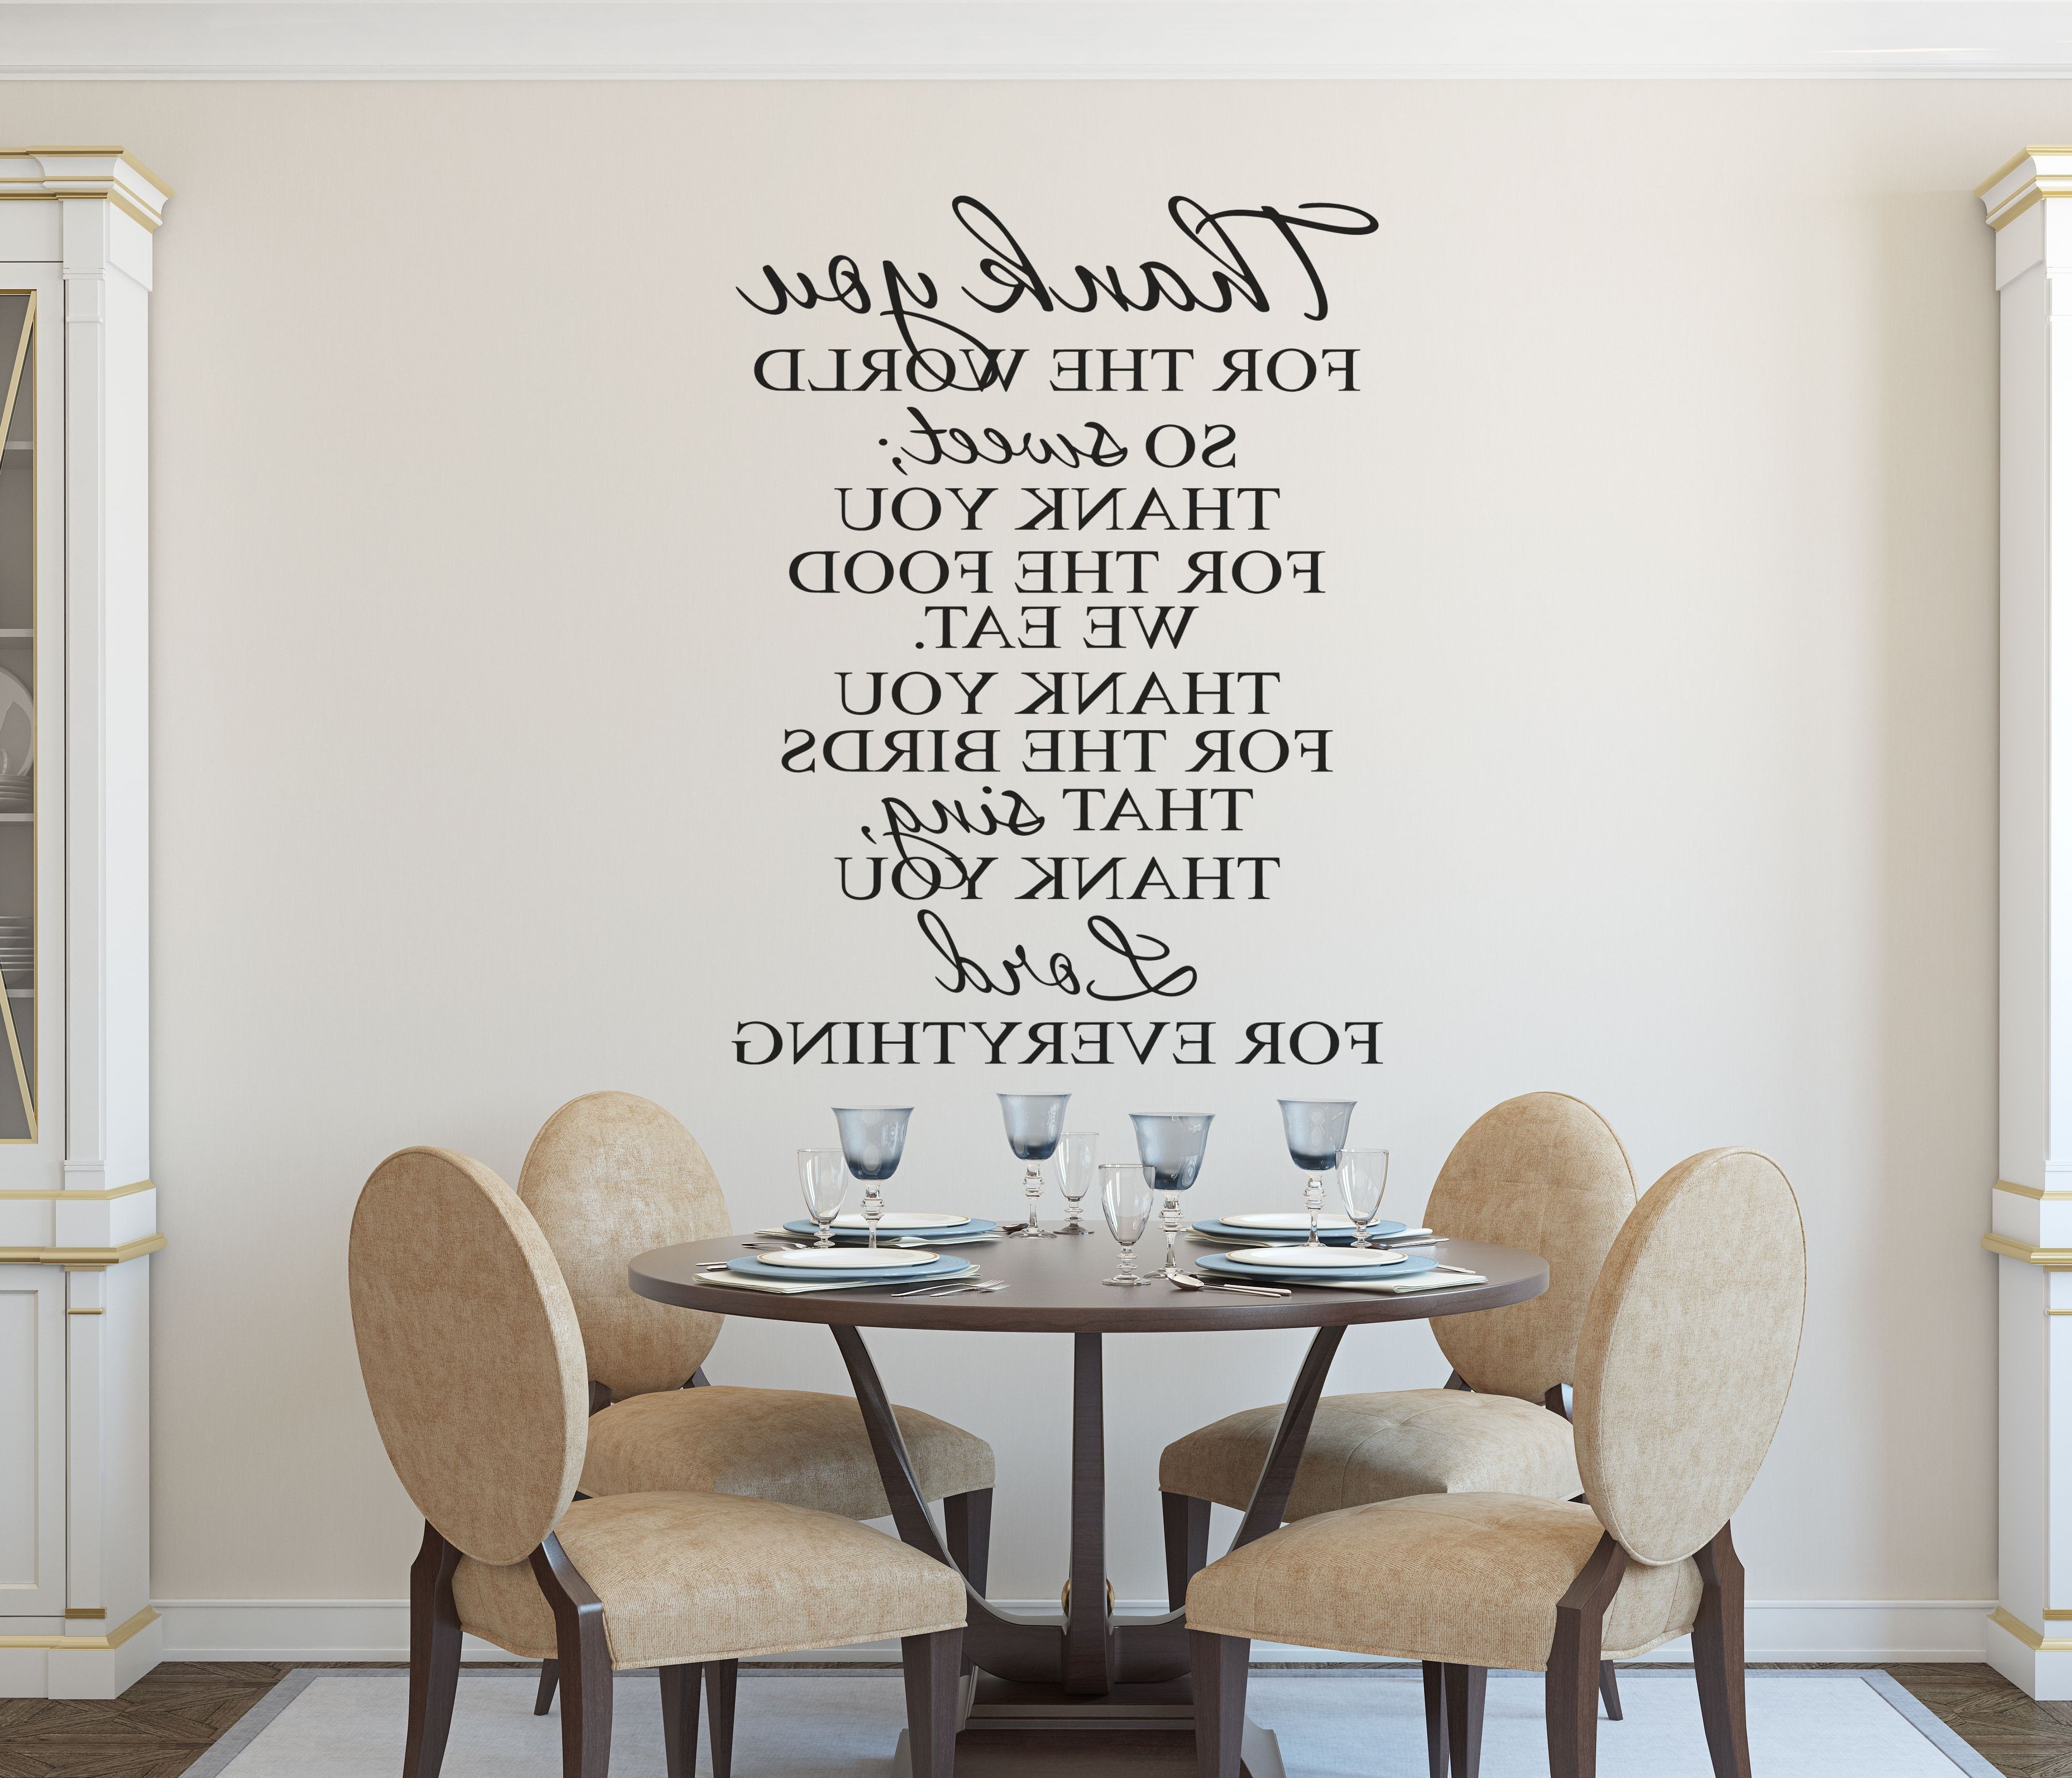 Fashionable Dining Room Wall Art Awesome Bible Verse Wall Decals Bible Verses Regarding Bible Verses Wall Art (View 6 of 15)